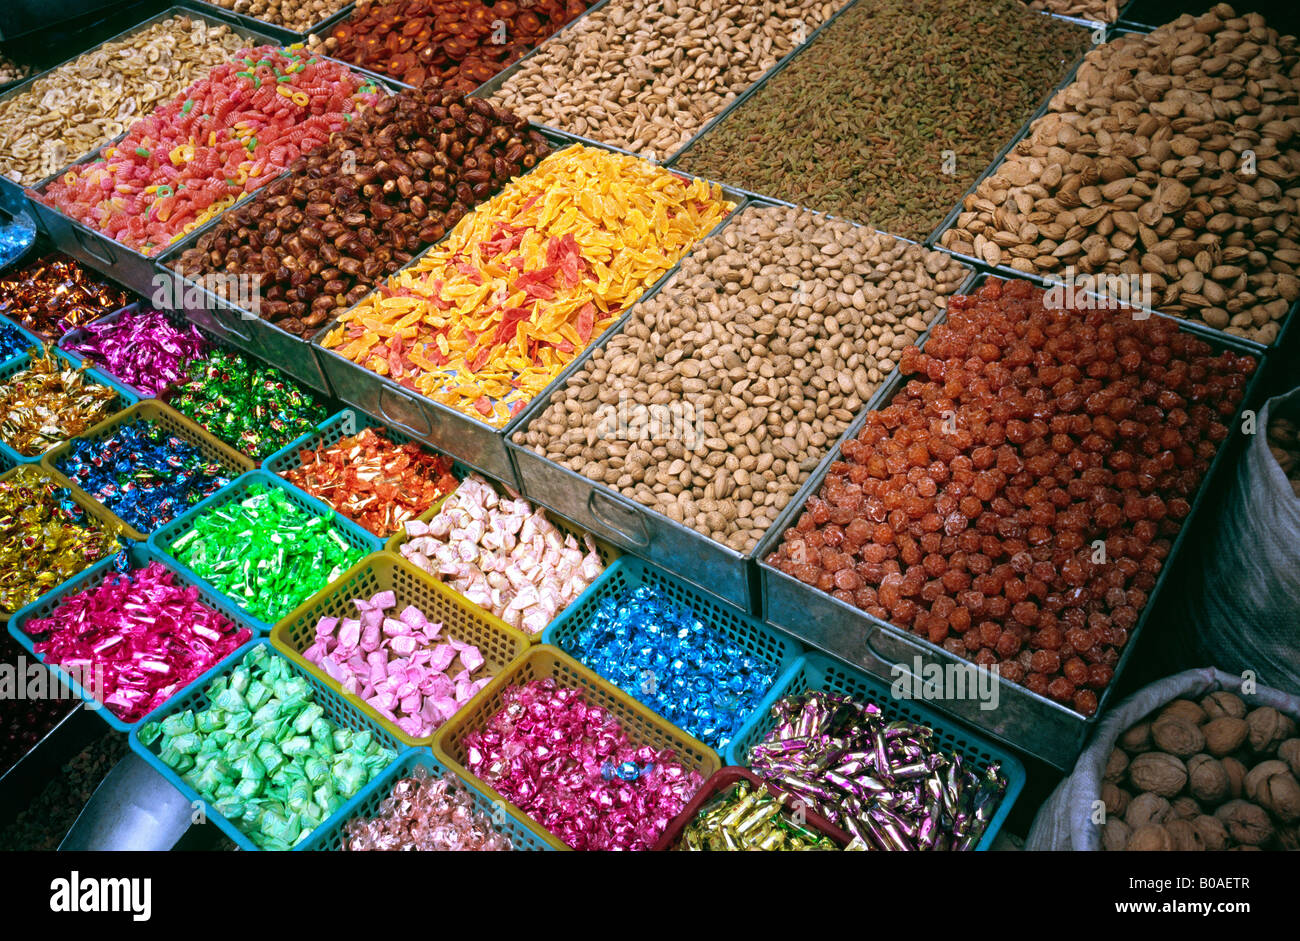 July 2, 2006 - Dried fruits and sweets for sale at Kashgar's Sunday market in the Chinese province of Xinjiang. Stock Photo